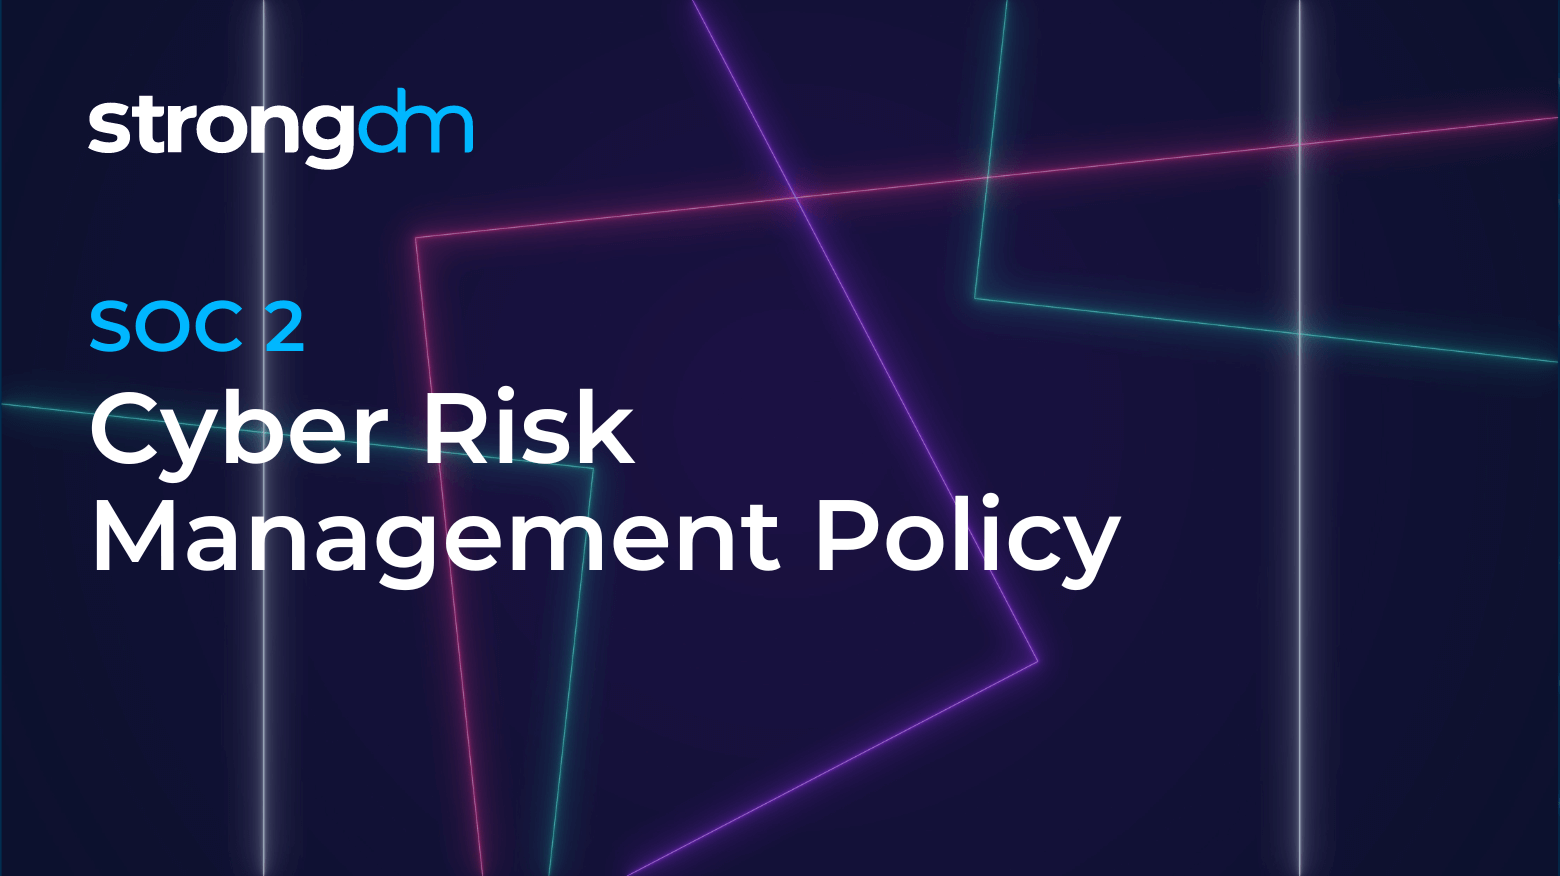 Cyber Risk Management Policy: 4 Important Considerations